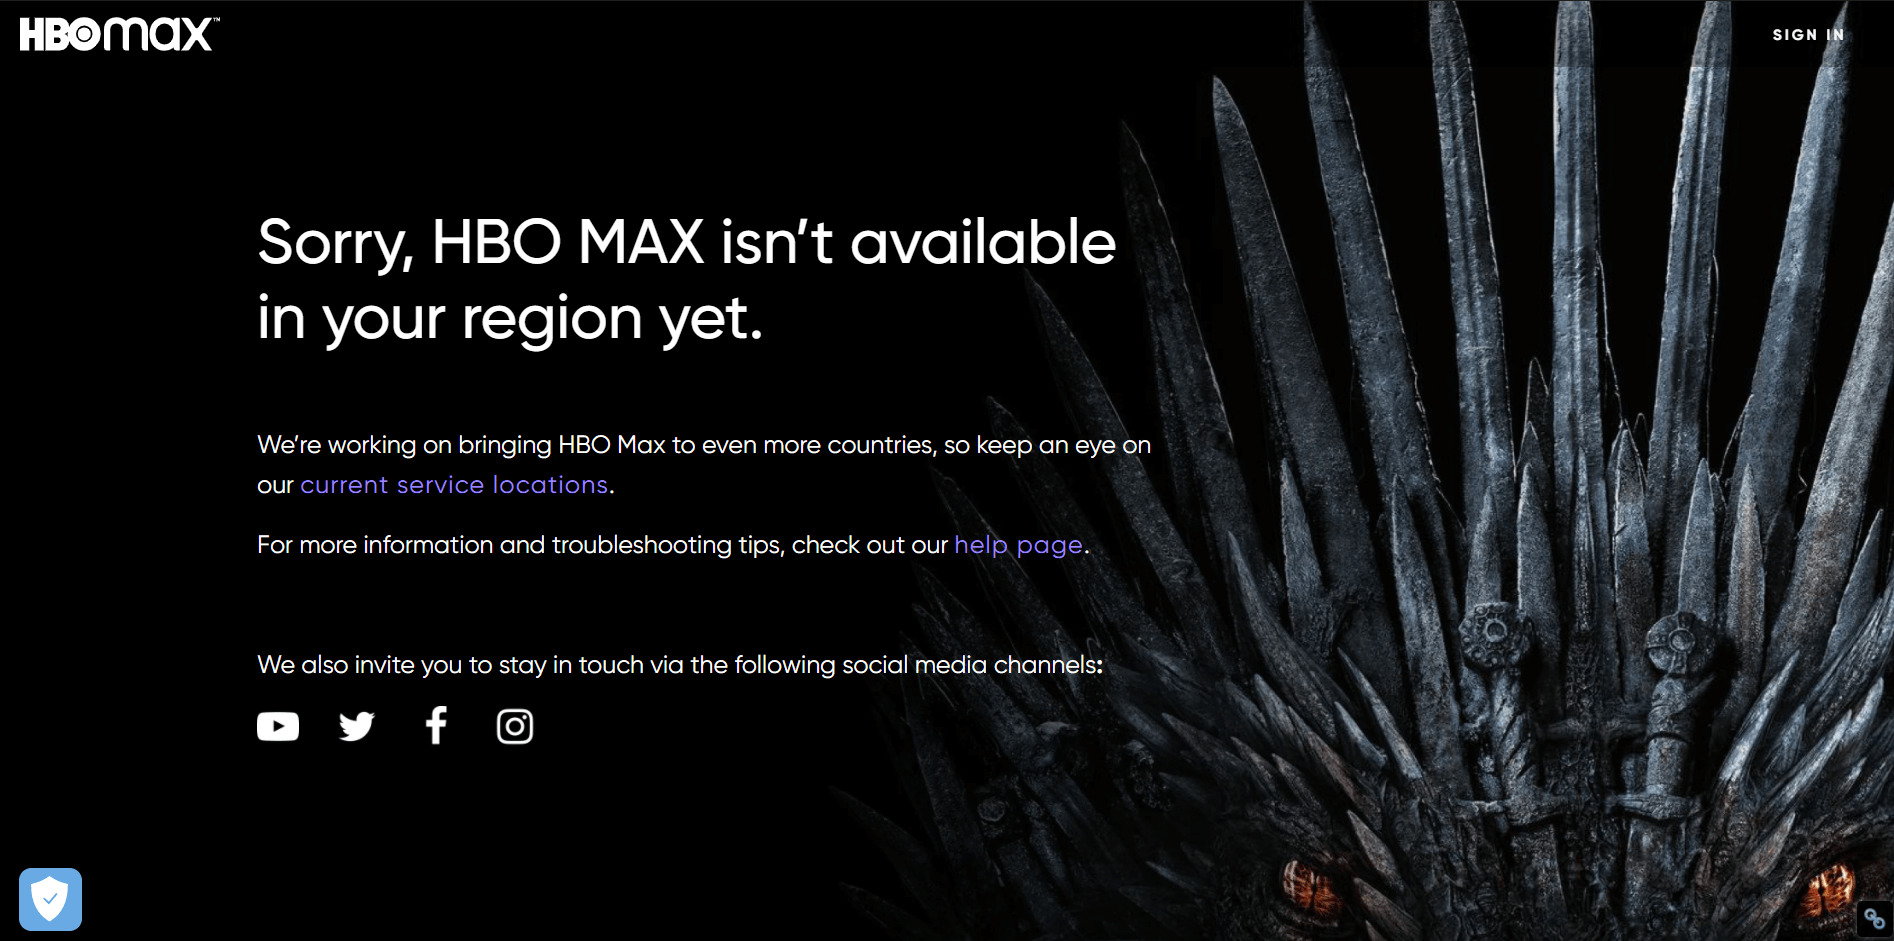 "The service is unavailable in your region" message on HBO Max